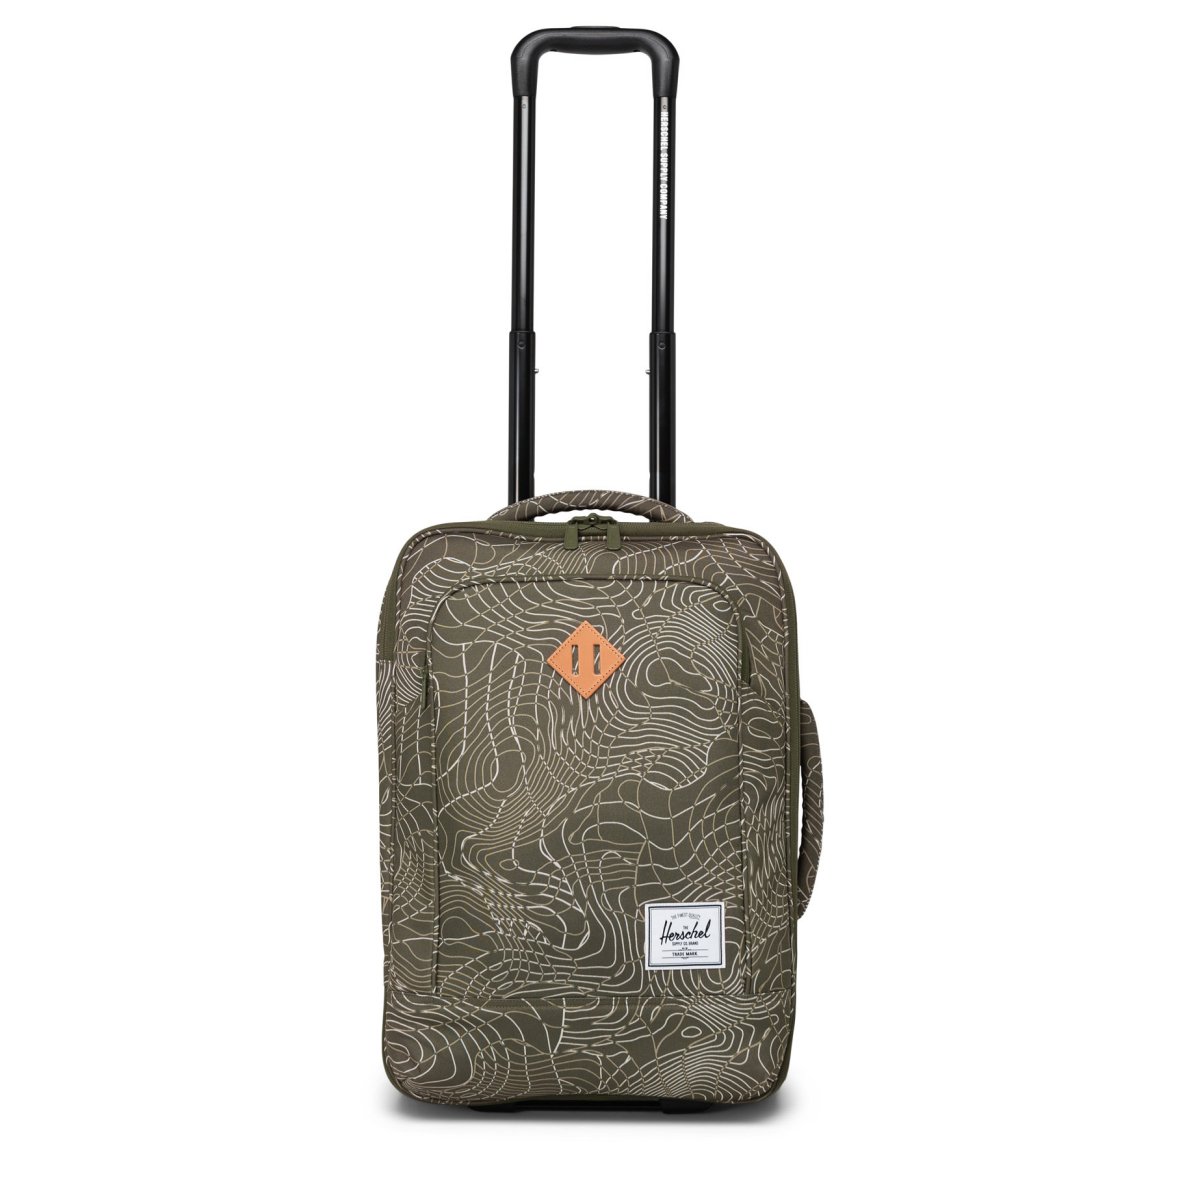 Heritage - Softshell Large Carry On Trolley in Ivy Green Topography von Herschel